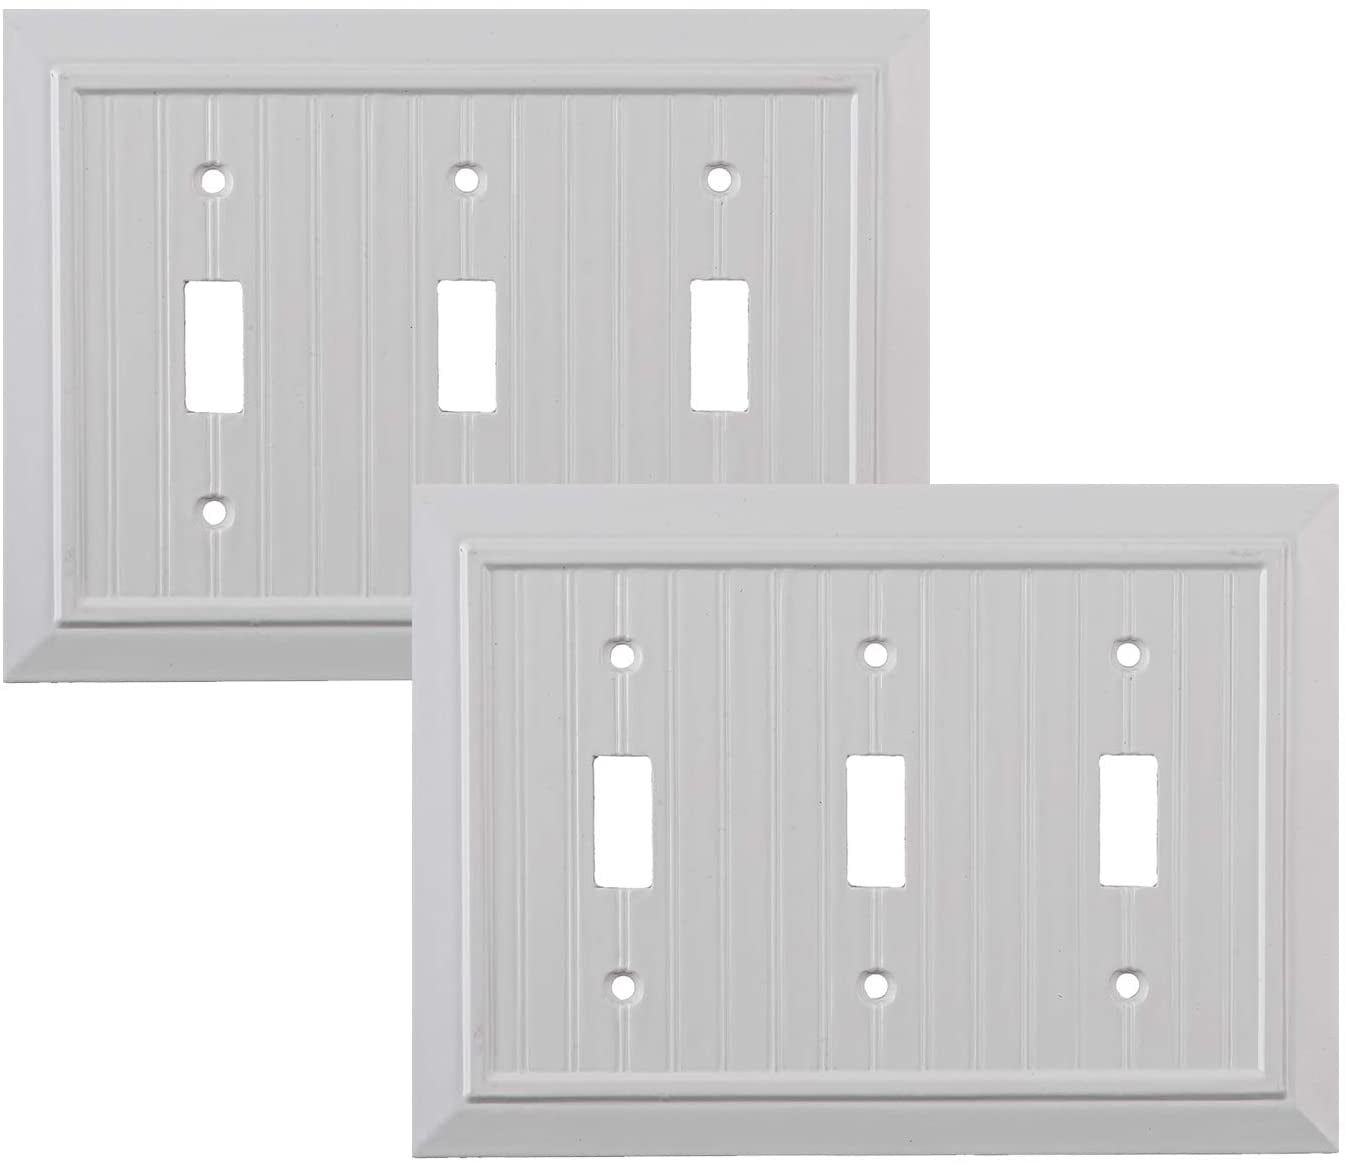 3 Pack - SnapPower GuideLight 2 for Outlets [New Version - LED Light Bar] -  Night Light - Electrical Outlet Wall Plate with LED Night Lights -  Automatic On/Off Sensor - (Duplex) 